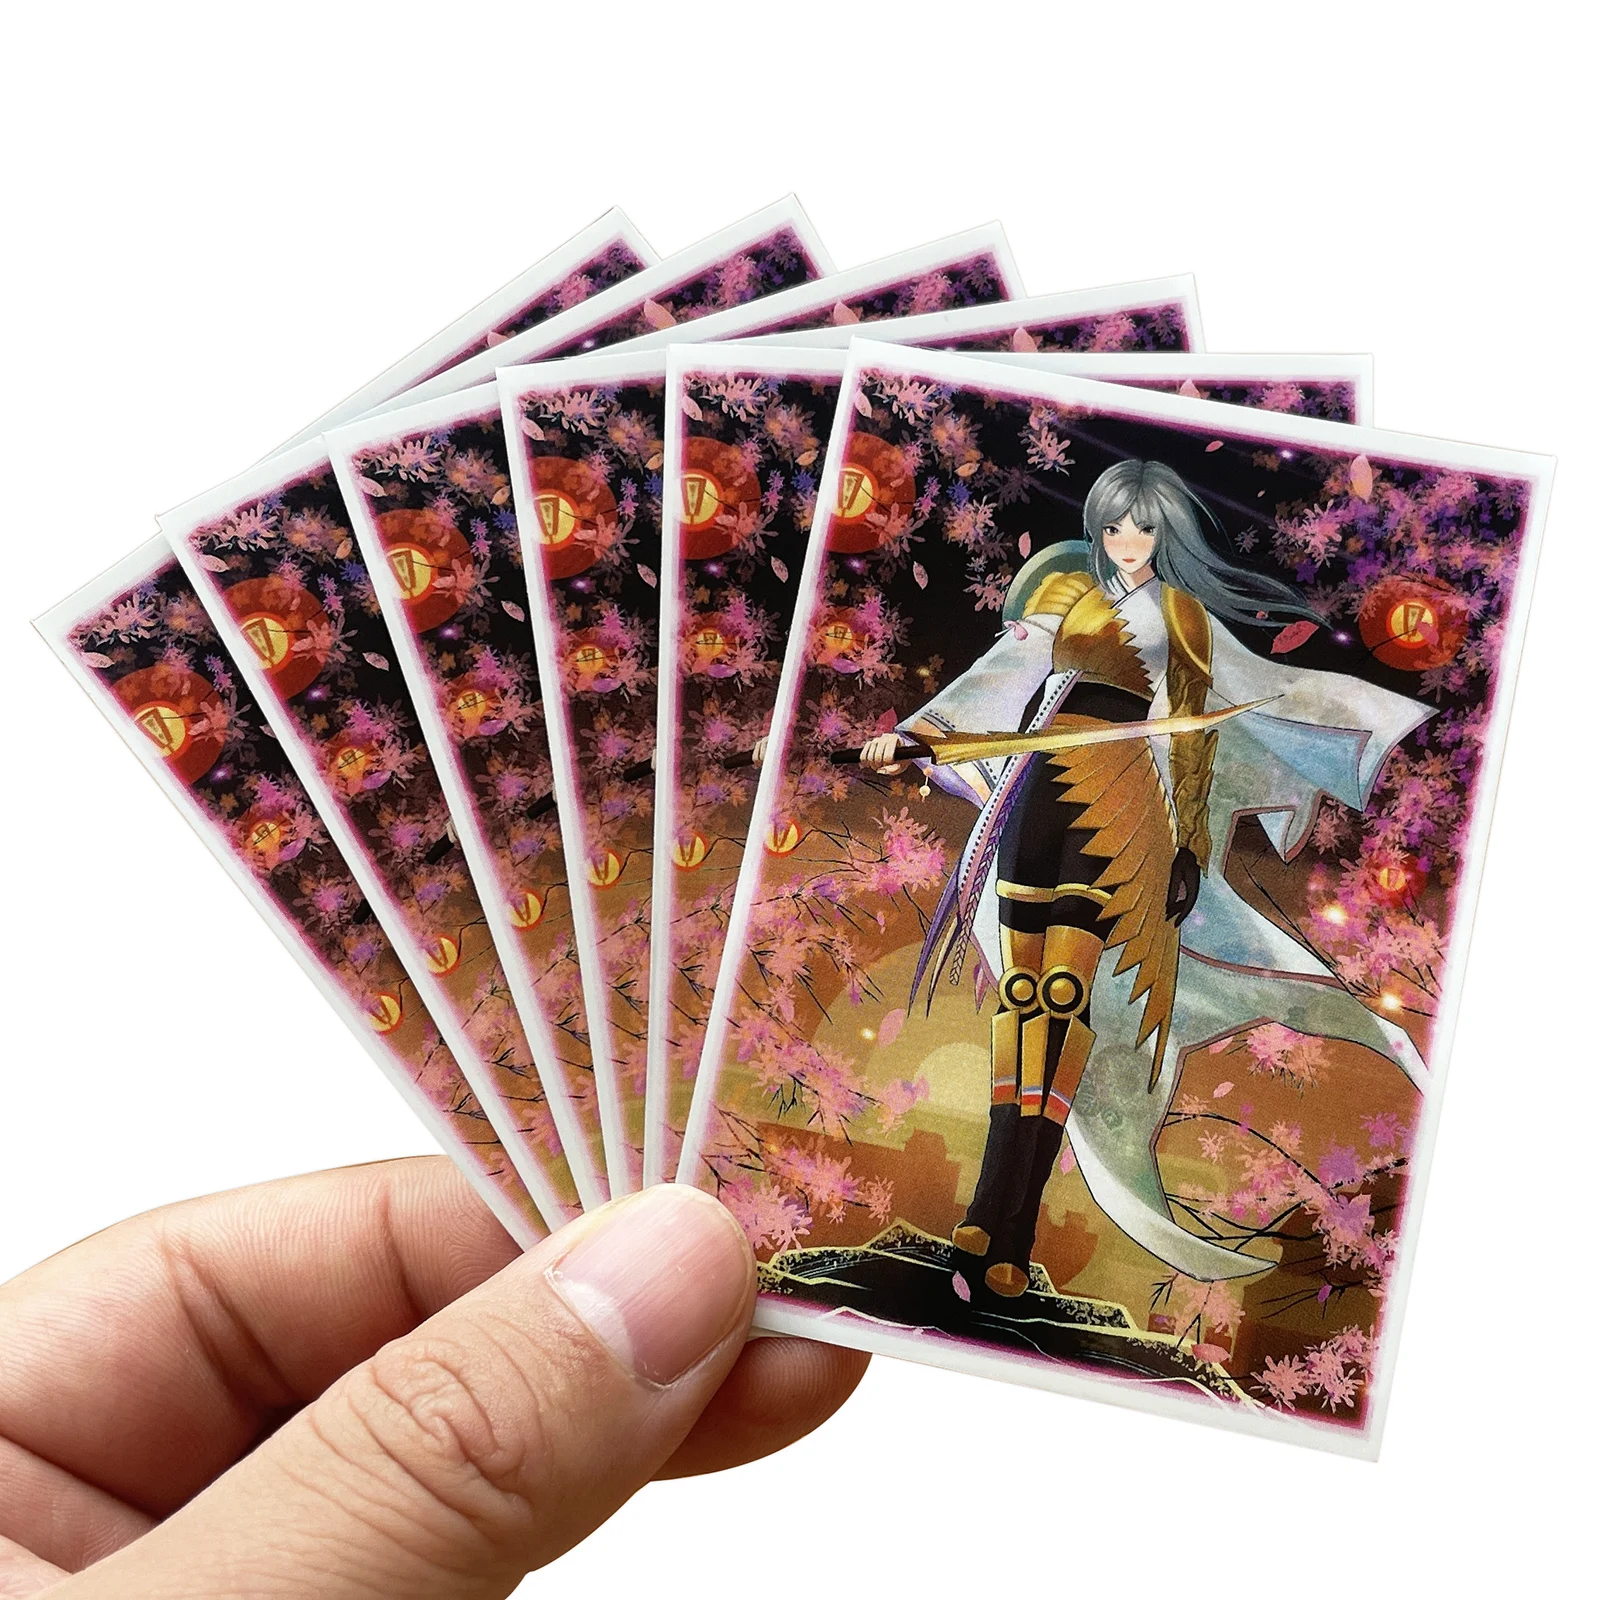 60PCS/BAG TCG Card Sleeves MGT Wandering Emperor Sleeves Game Characters Protector Cards Cover Shield Graphics Color Sleeves PKM michale myers horror characters lanyard credit card id holder bag student women travel card cover badge car keychain decorations